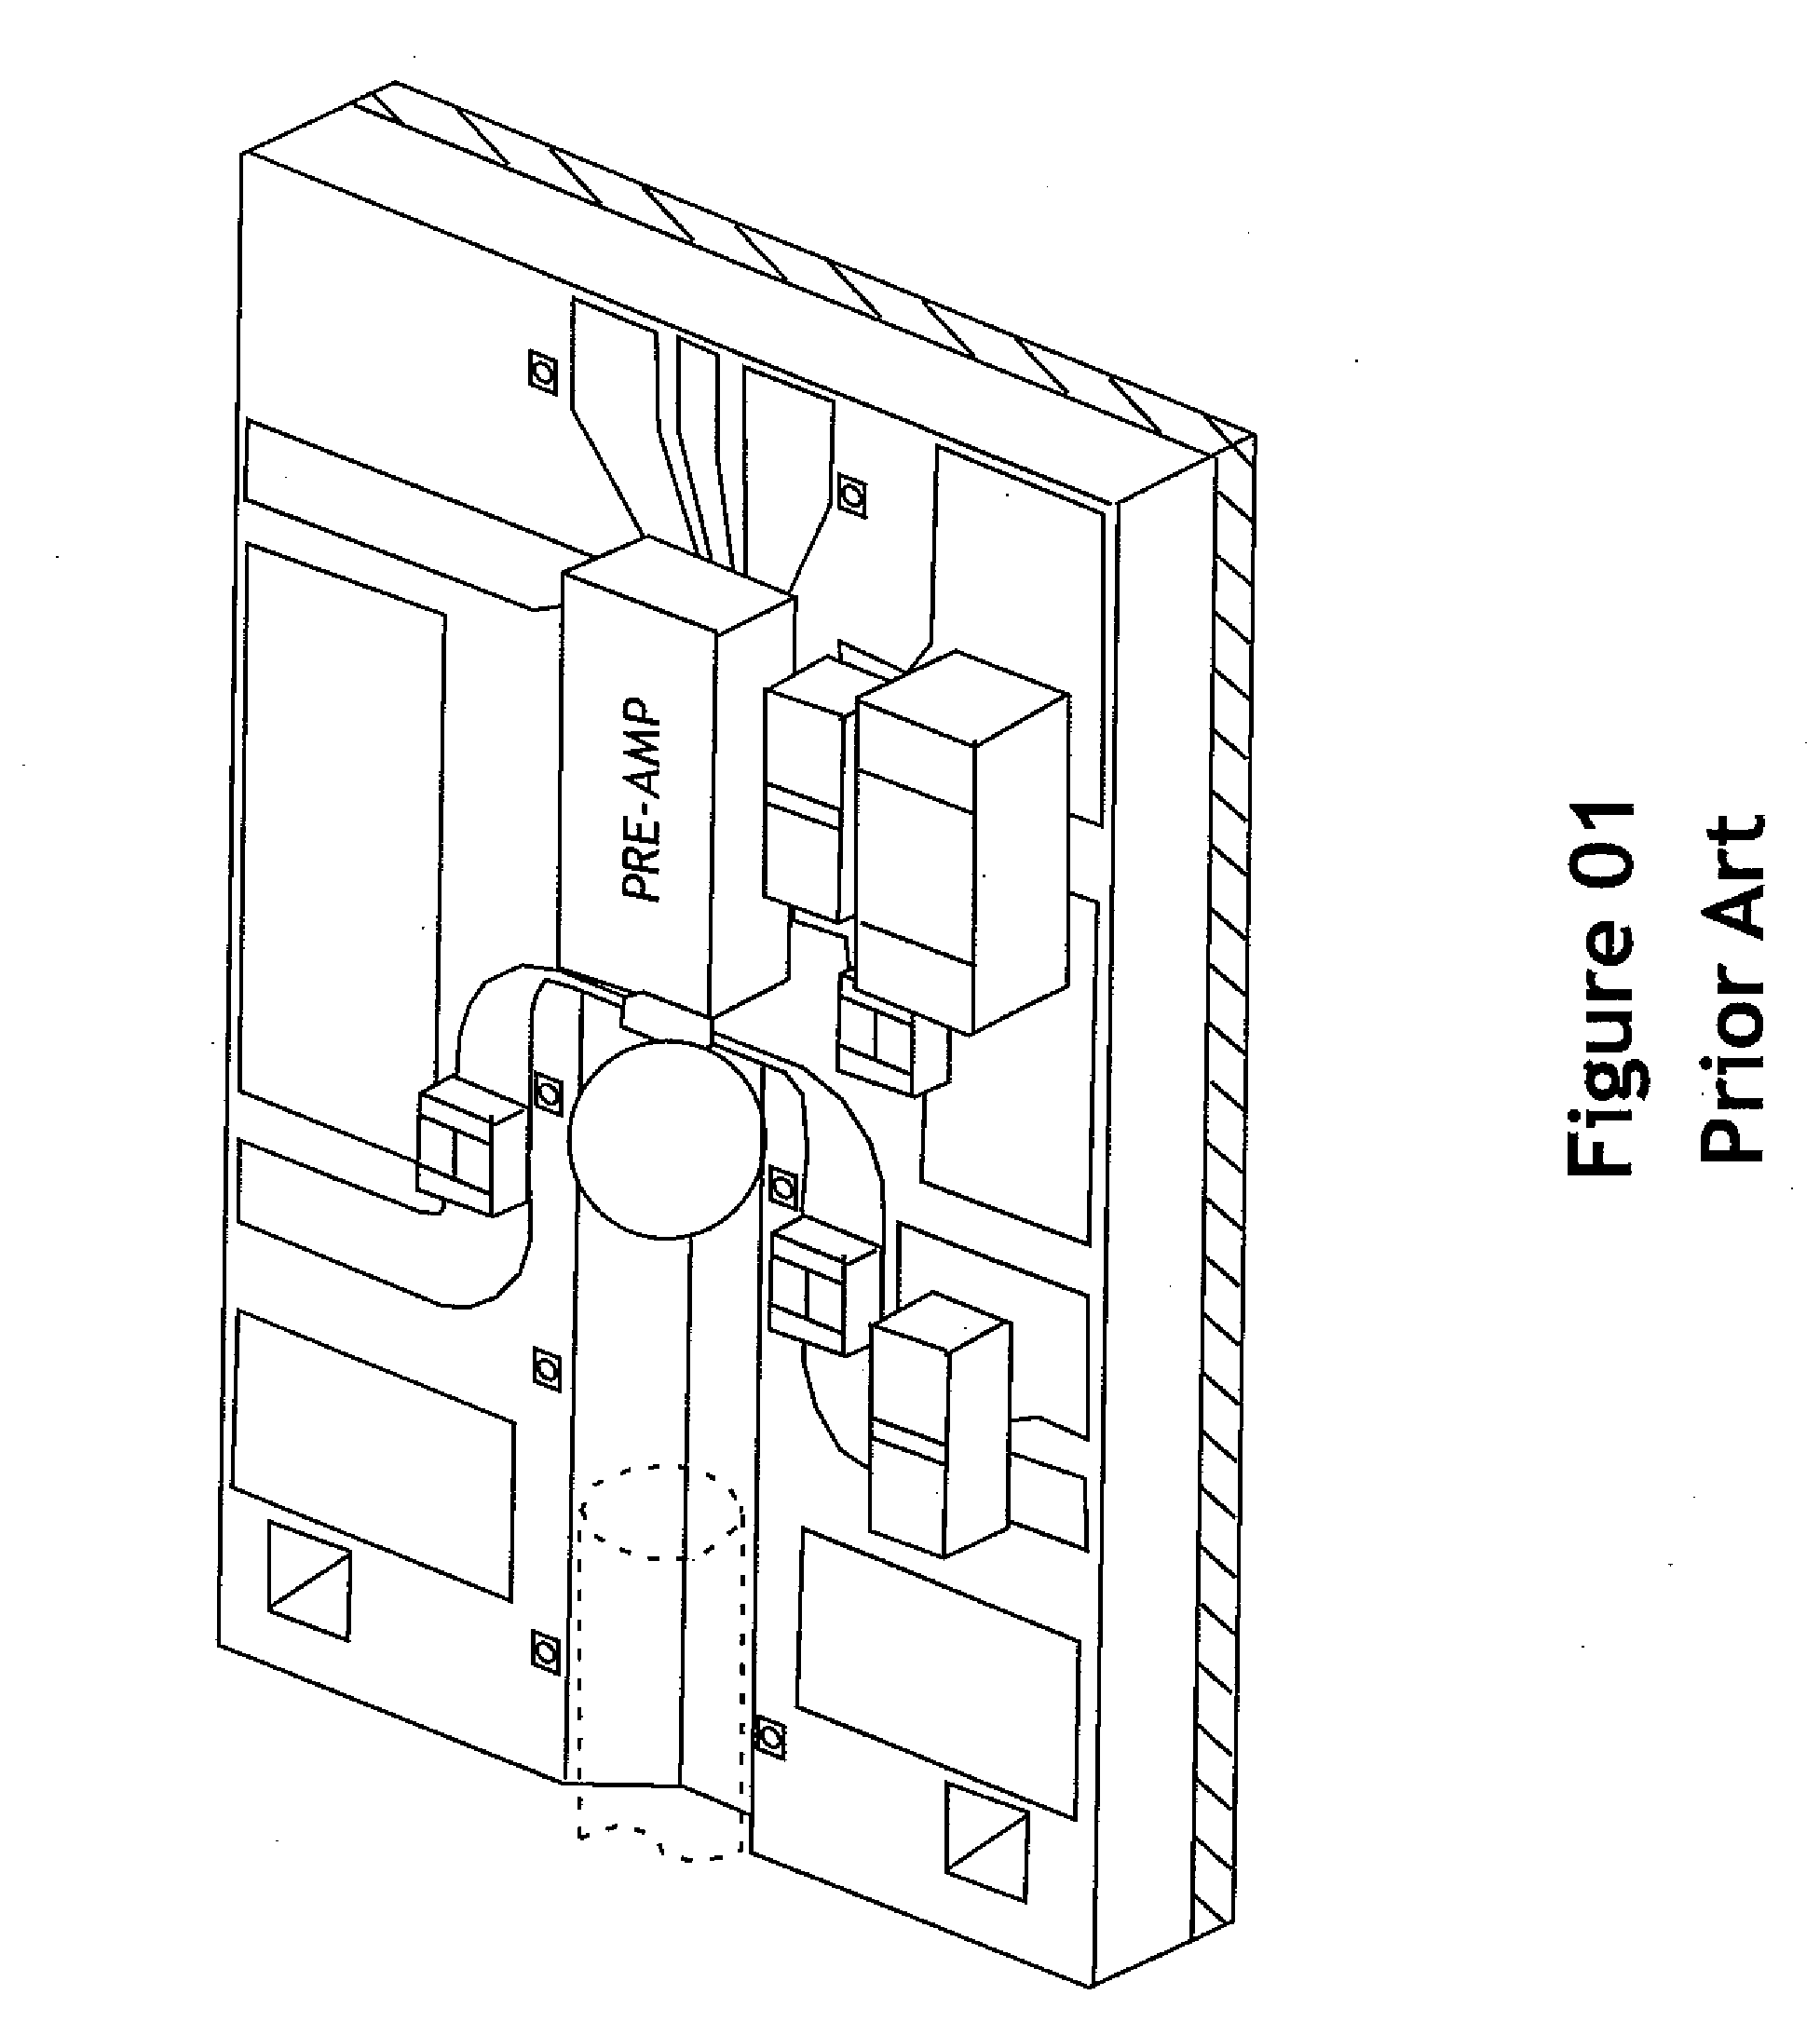 Optically-enabled integrated circuit package